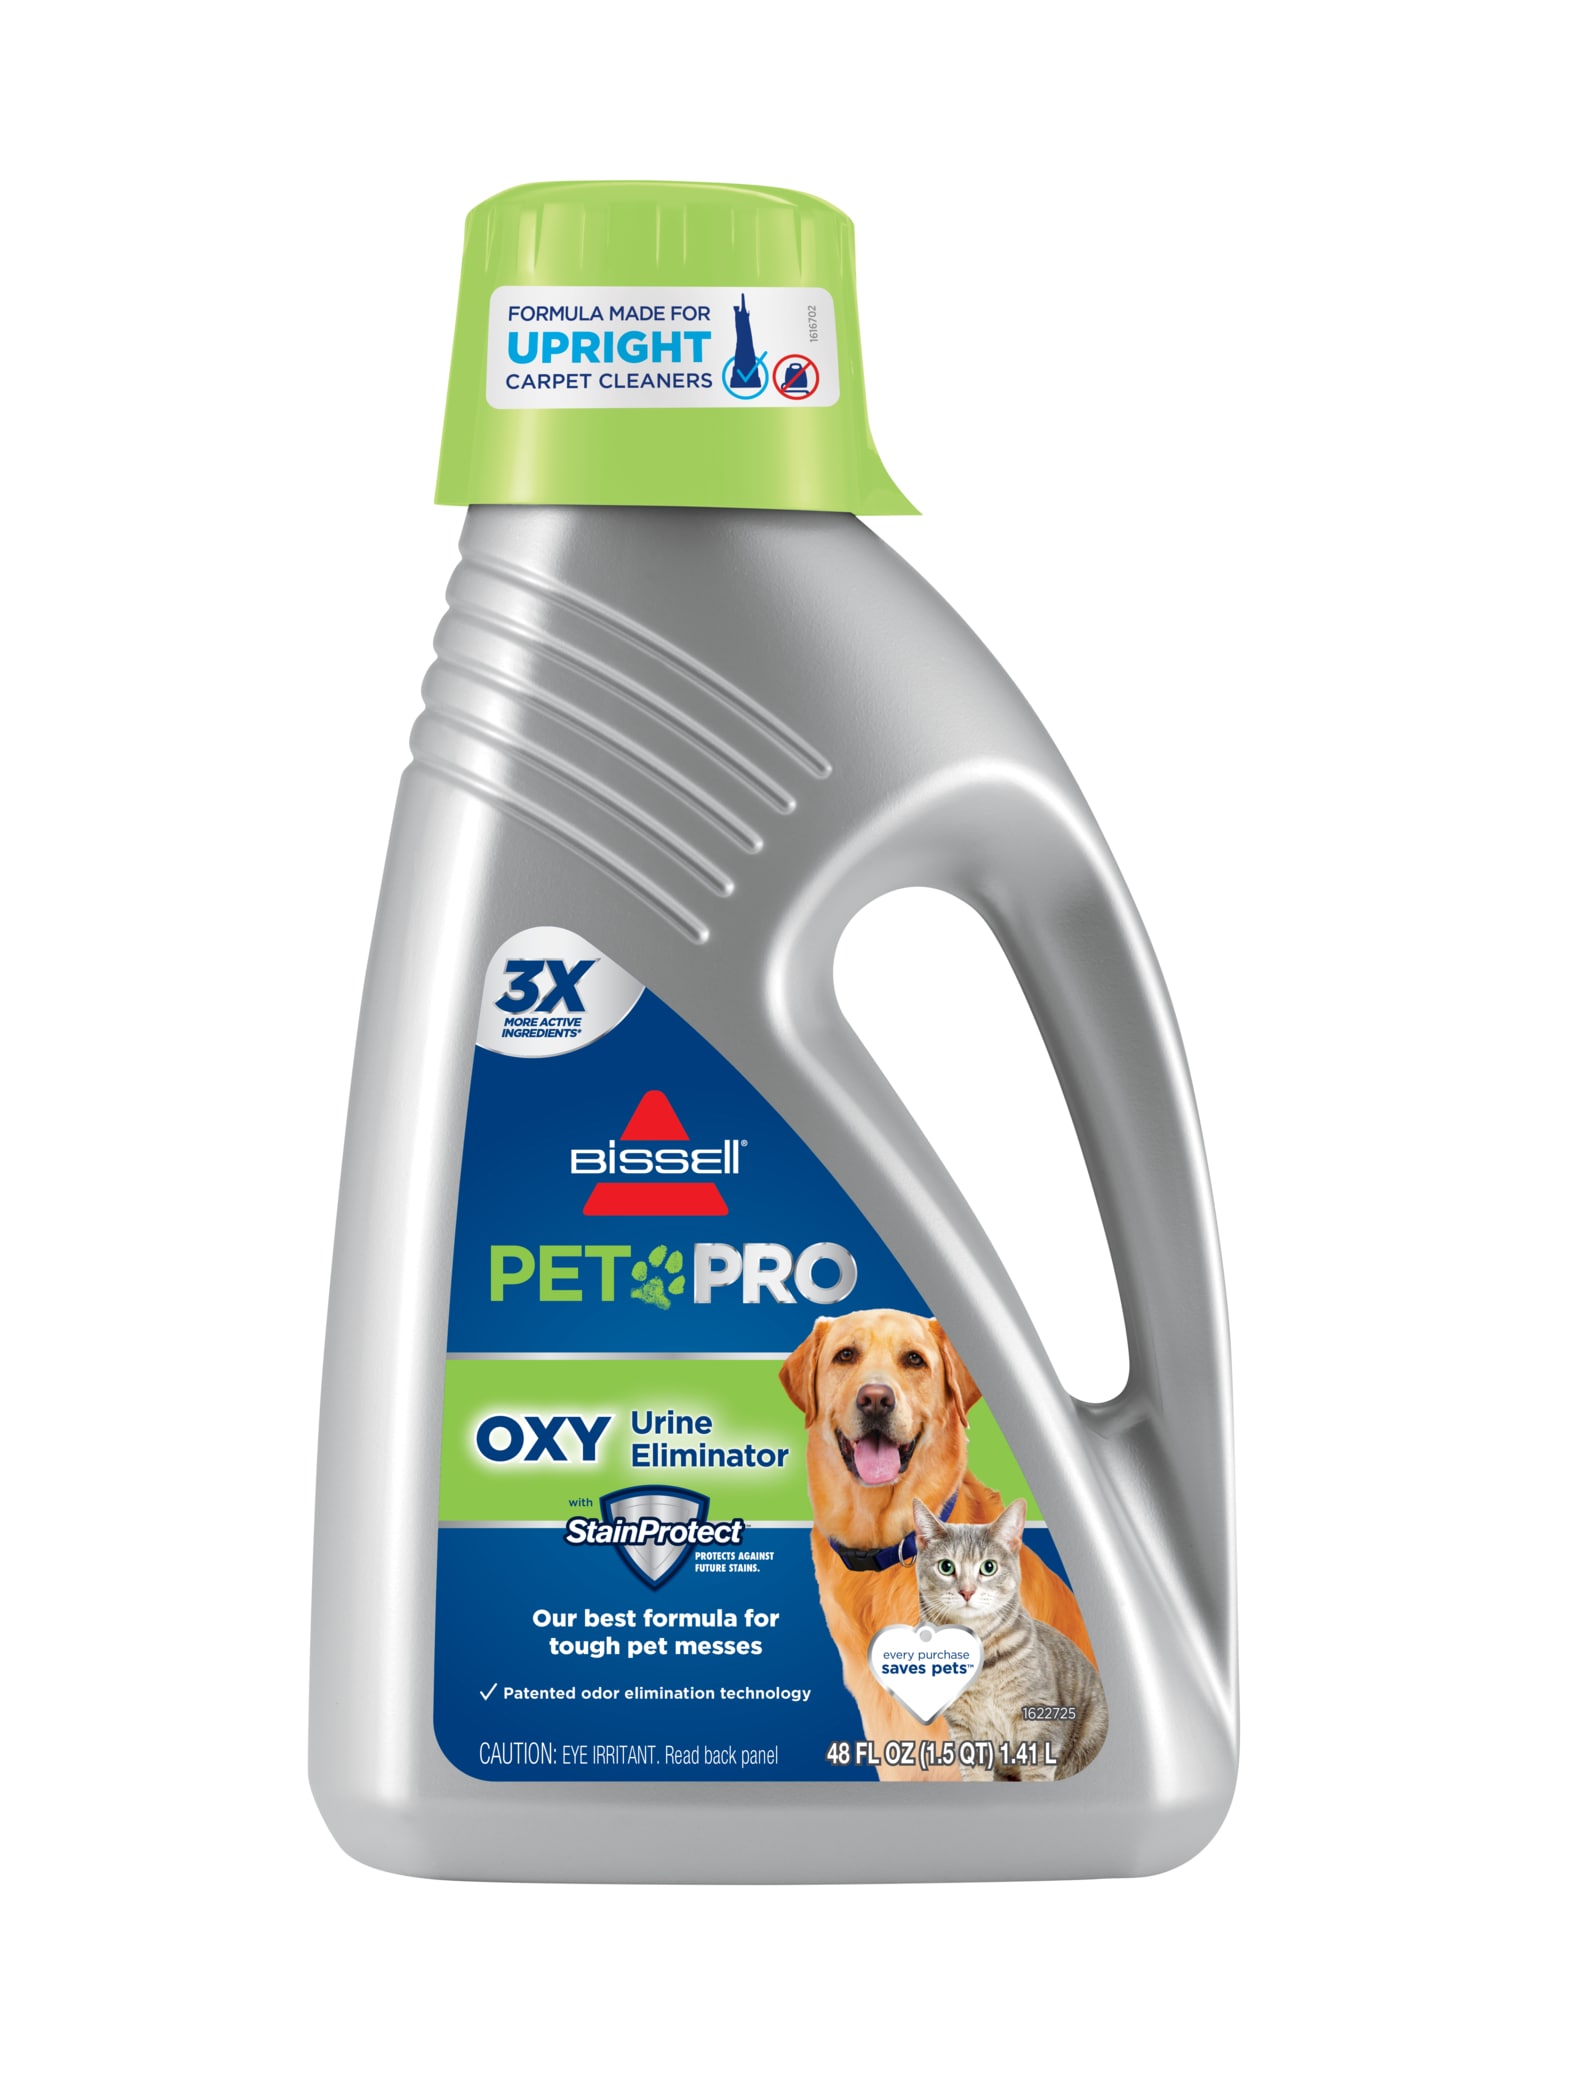 Woolite Pet Stain & Odor Remover, Free & Clear - 22 fl oz